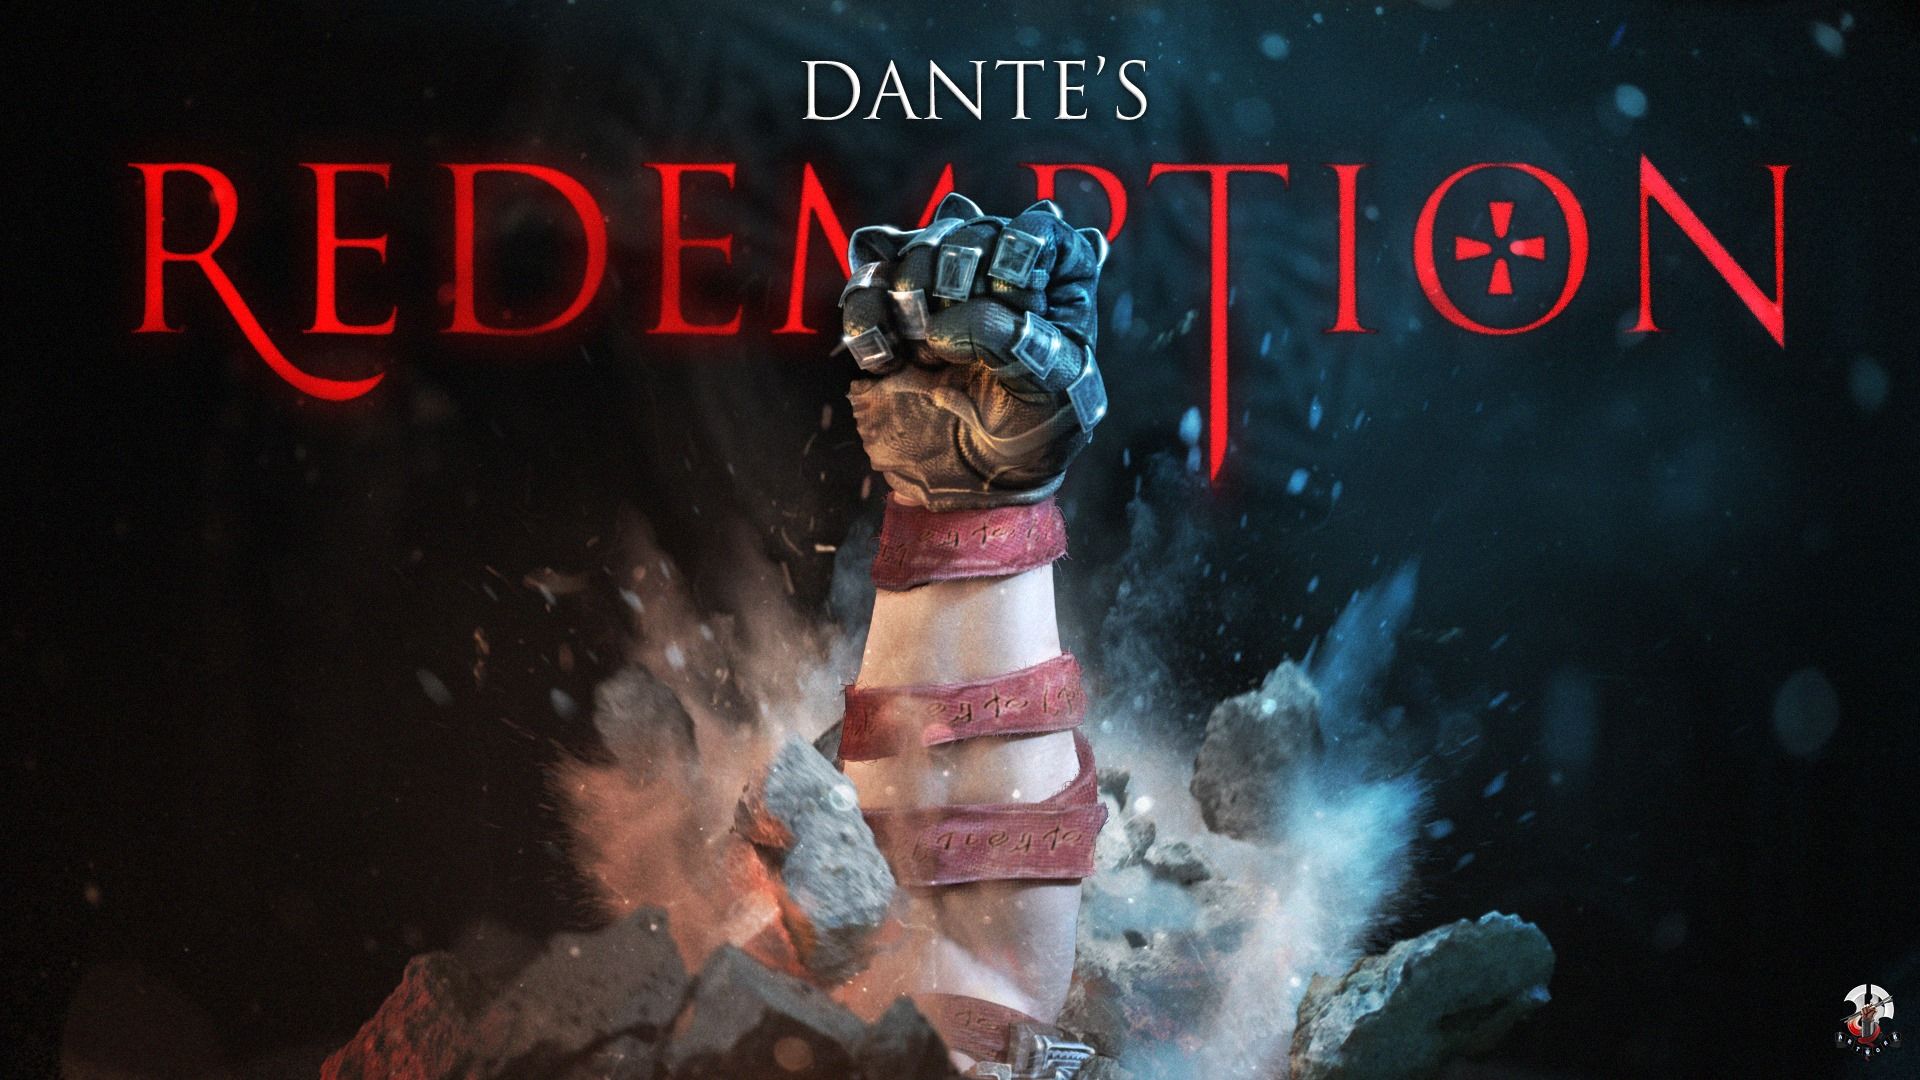 Dog Releases Dante's Inferno CGI Fan Video, Explains its Creation